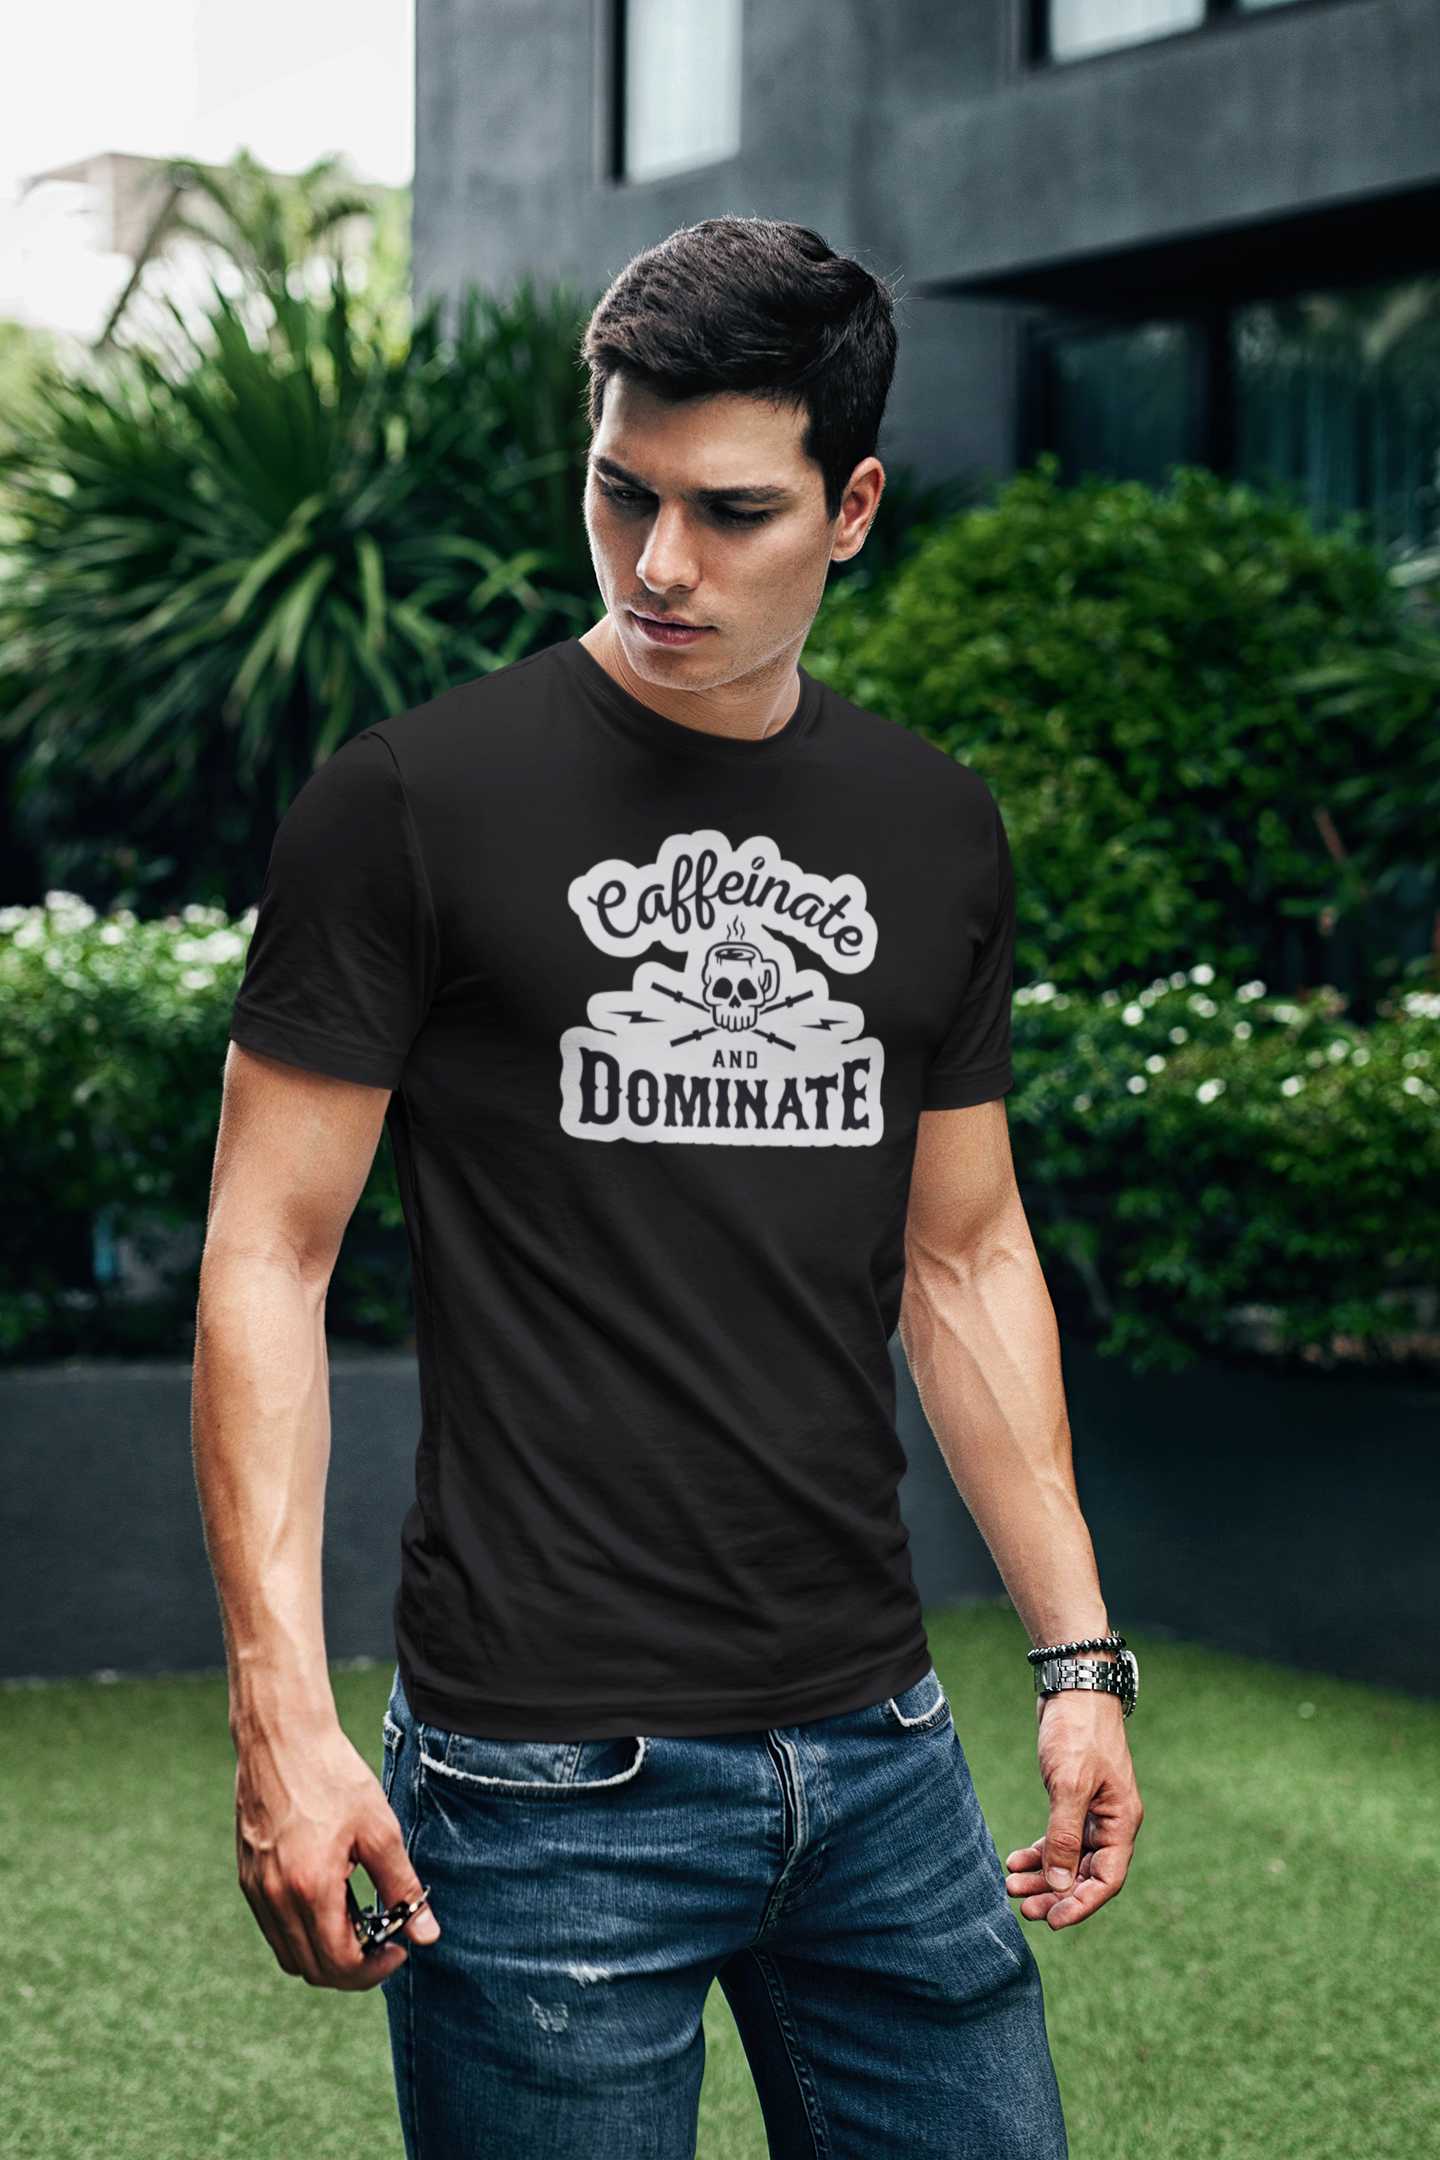 Caffeinate And Dominate - Gym T Shirt Strong Soul Shirts & Tops